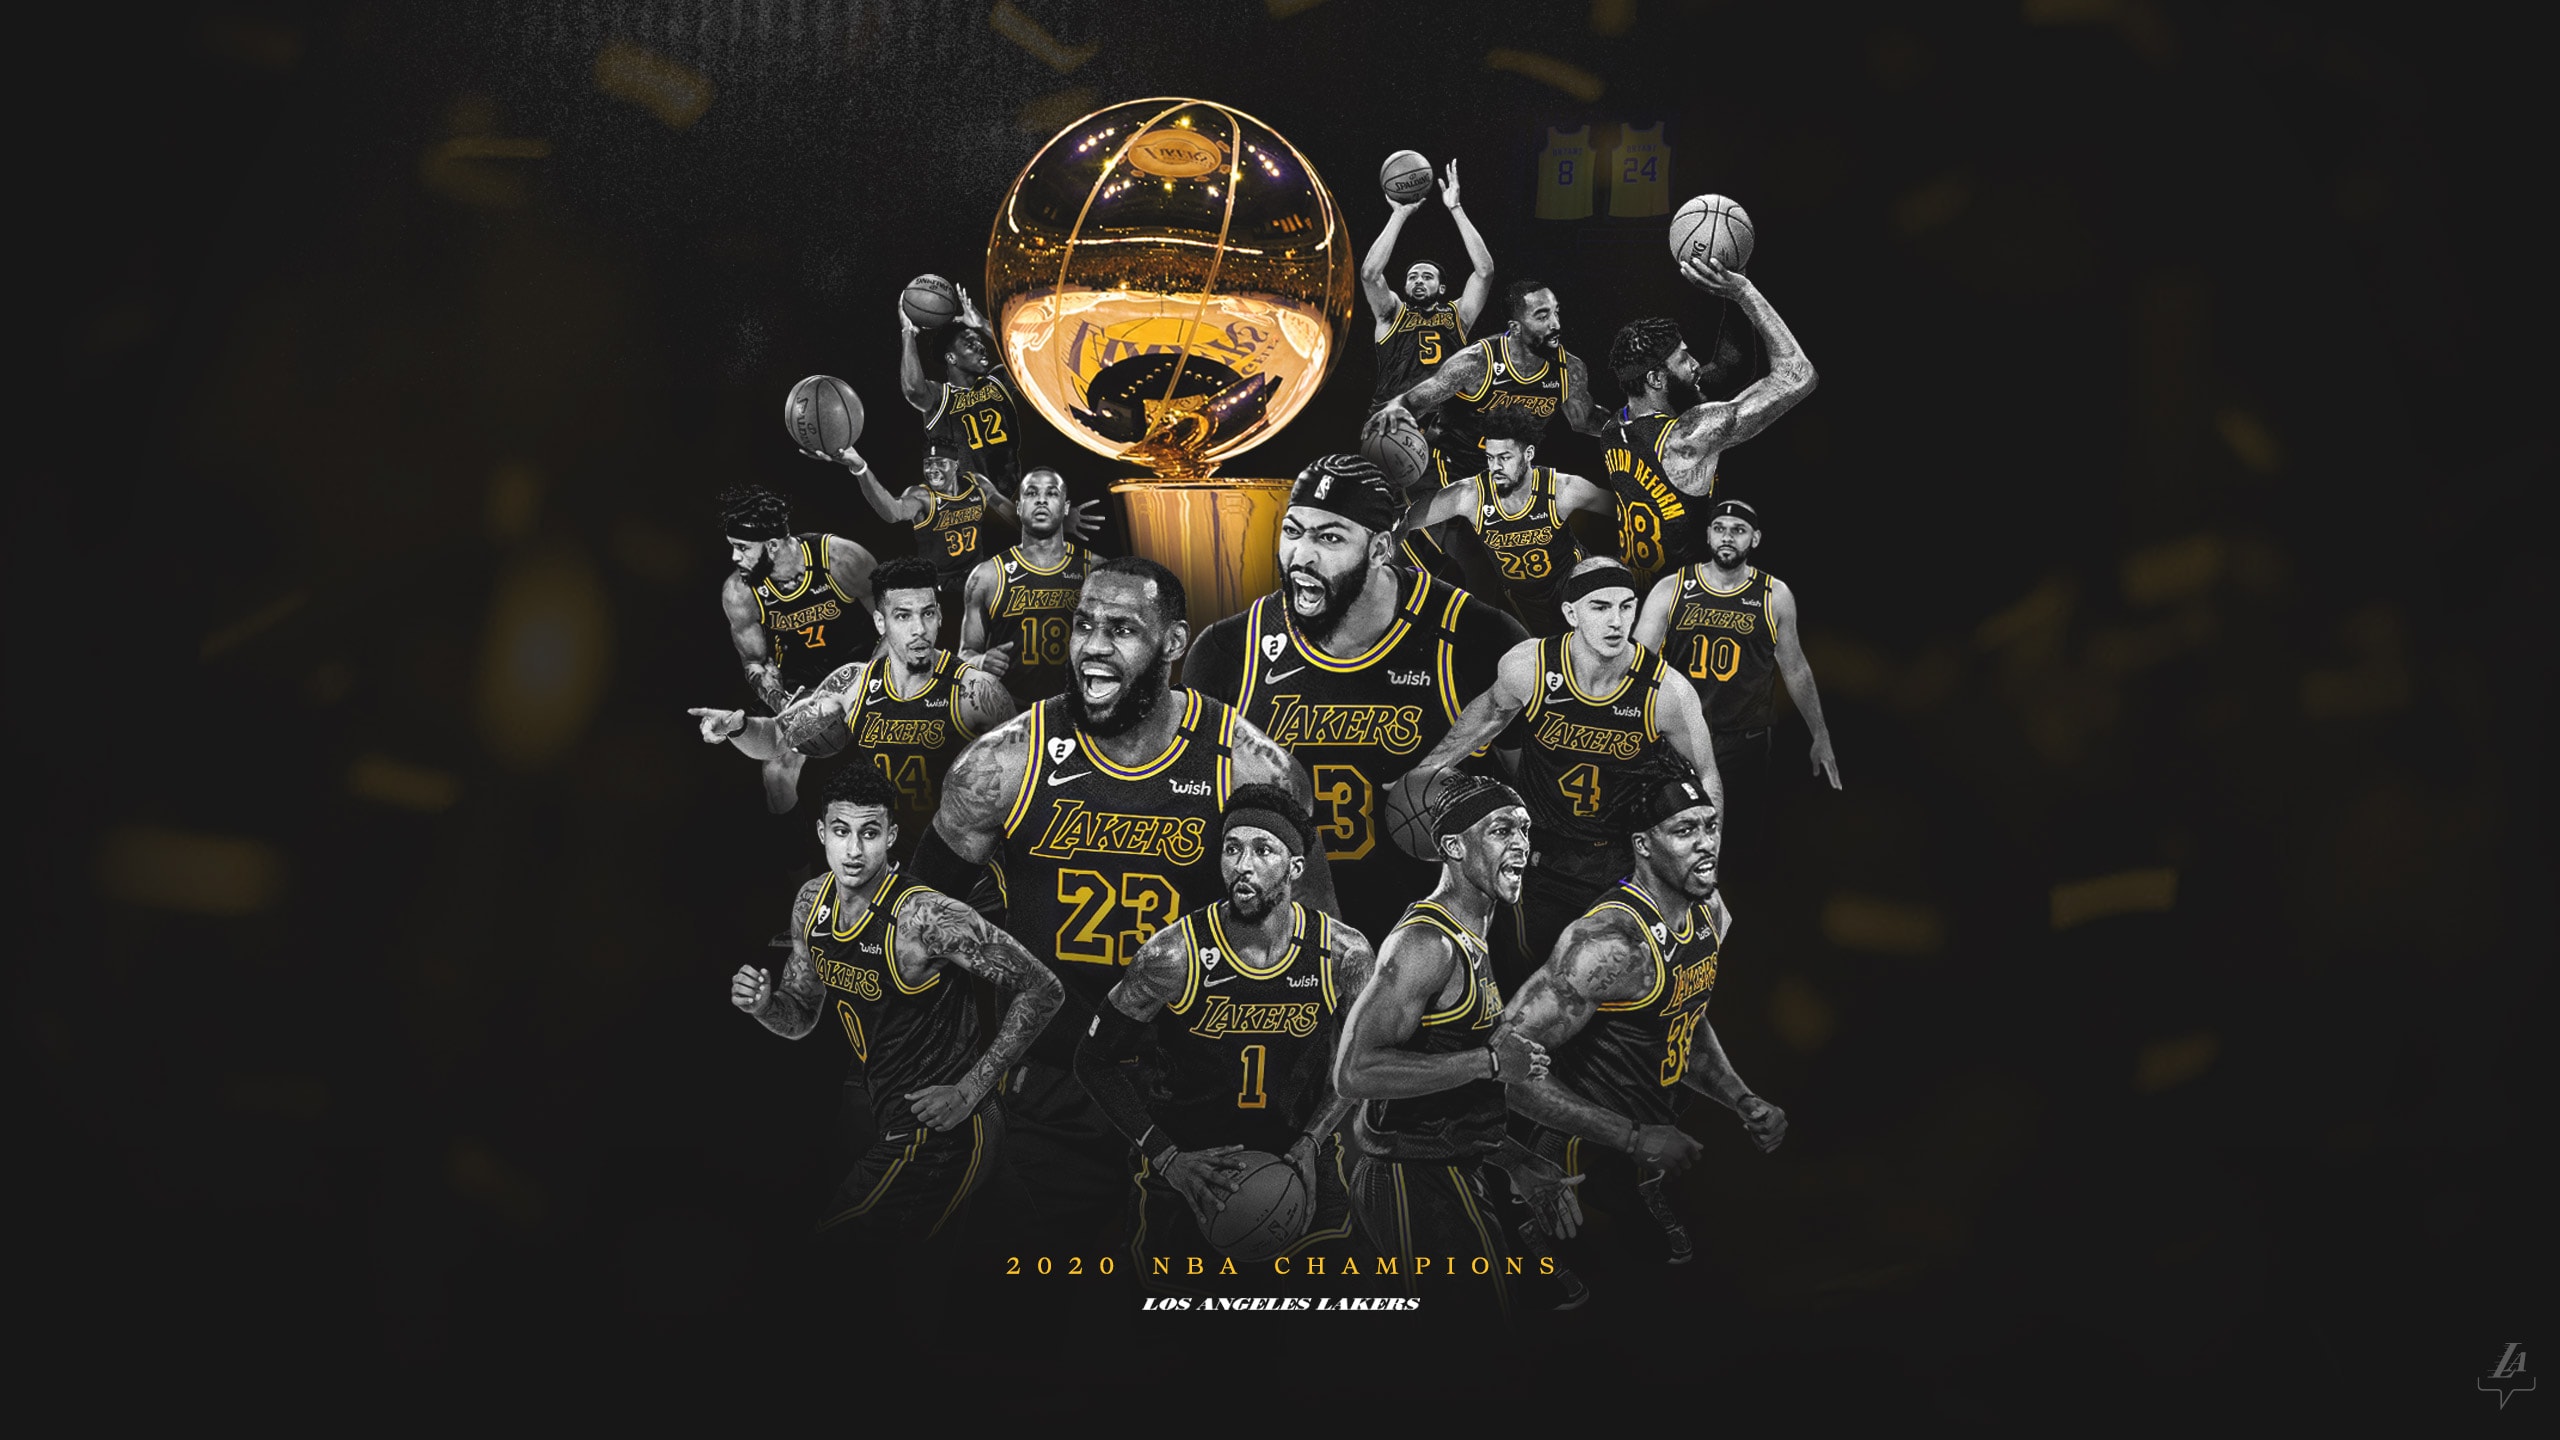 400+] Lakers Wallpapers